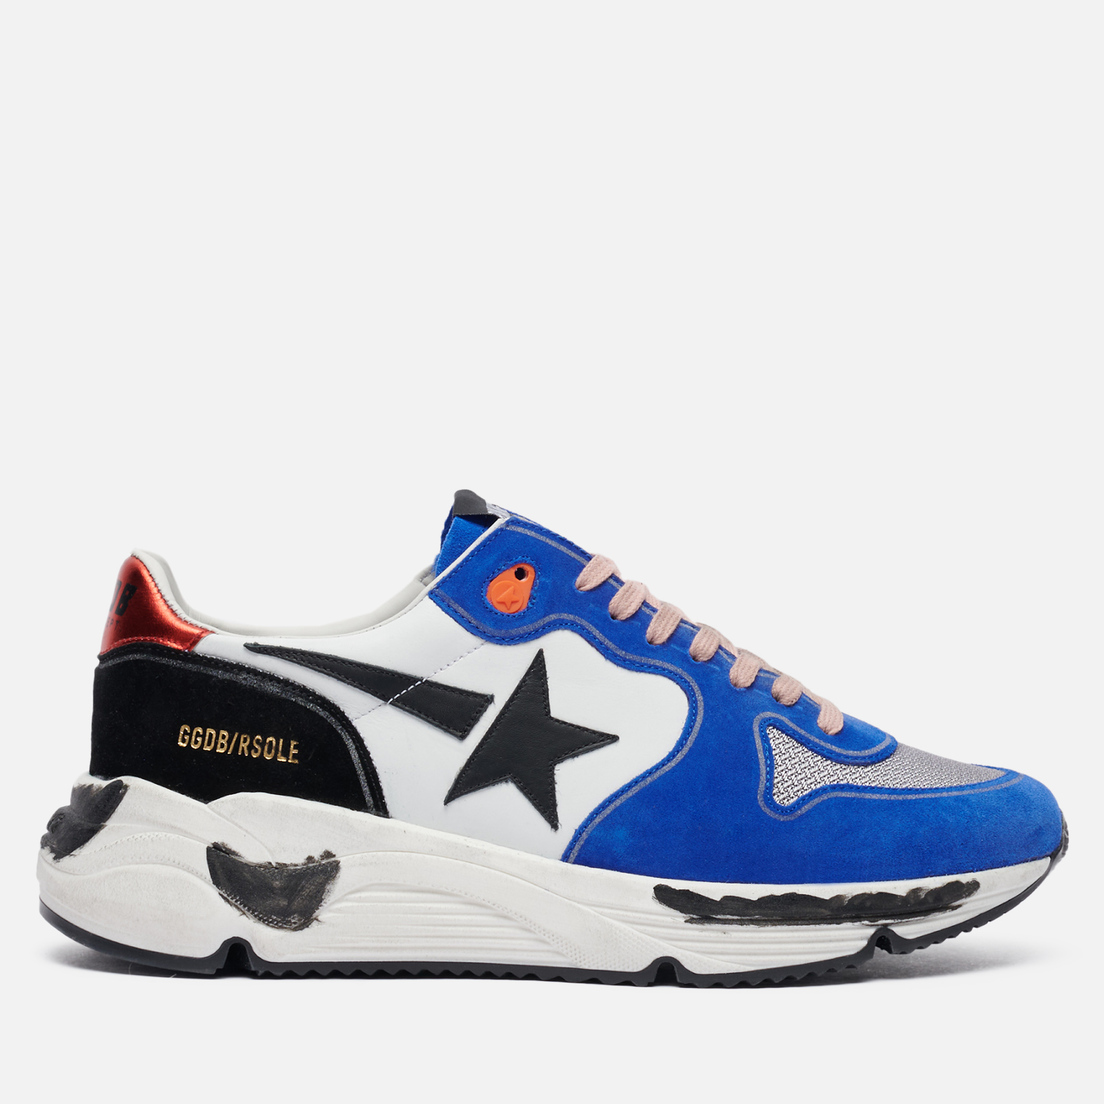 Golden Goose Мужские кроссовки Running Sole Leather/Leather Star